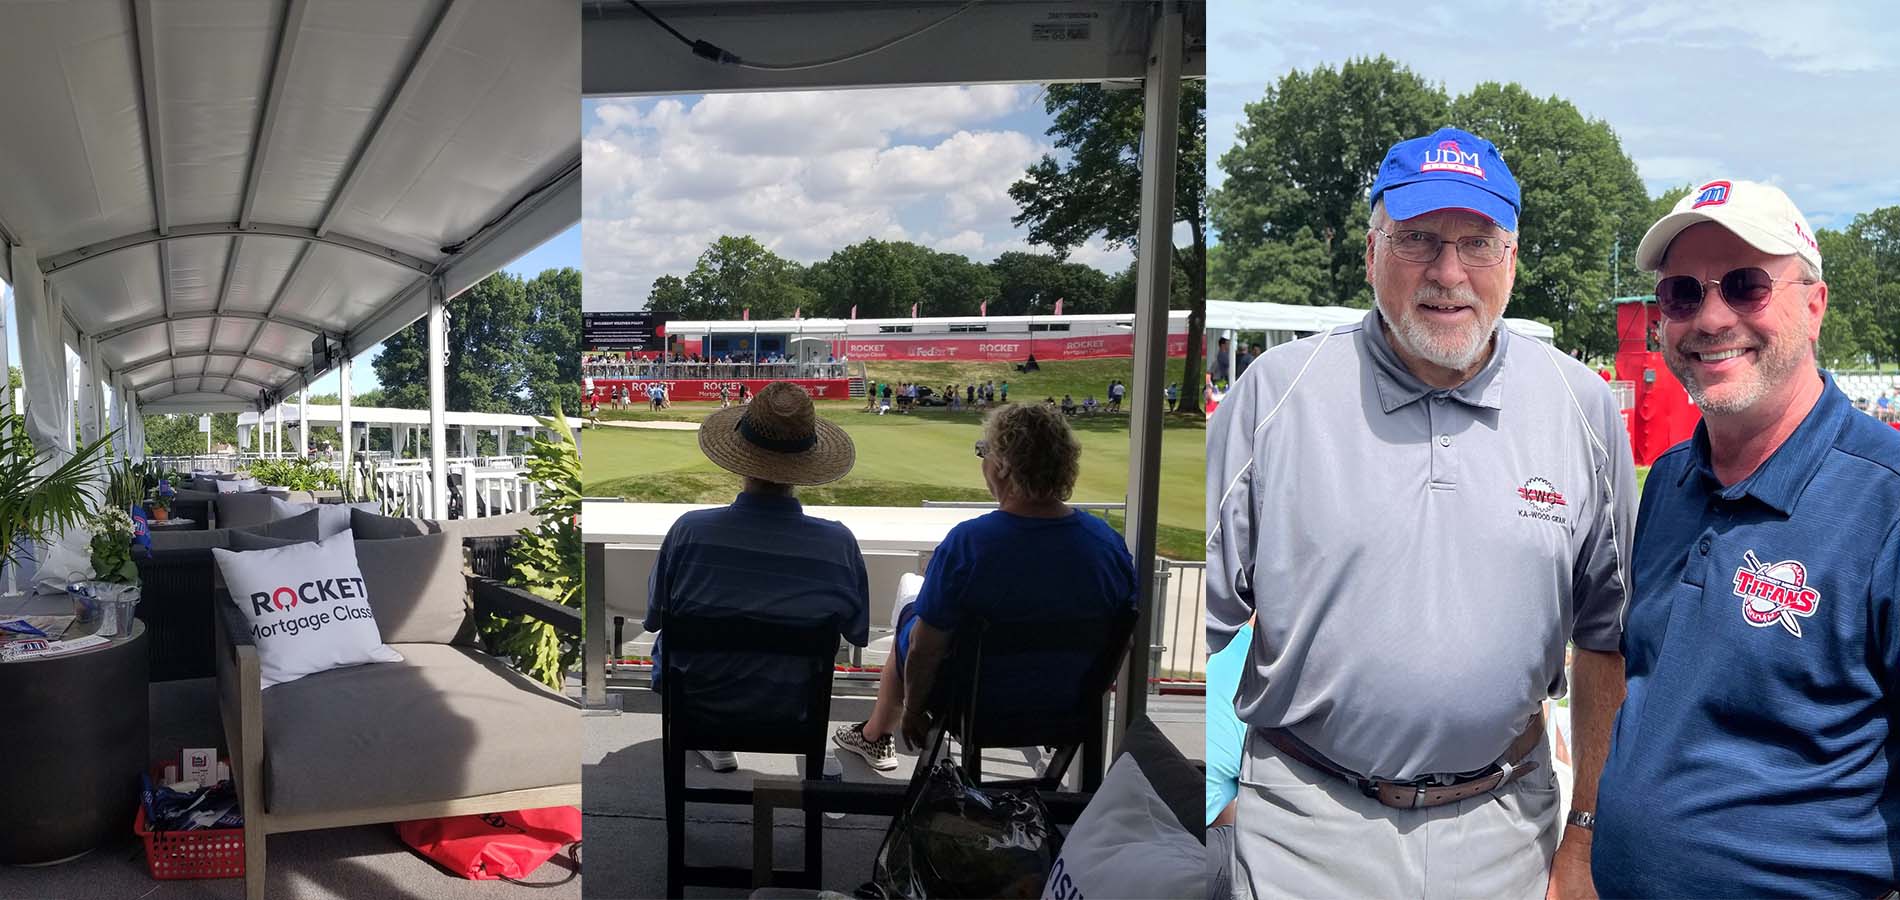 Photos of spectators in a suite during the Rocket Mortgage Classic at the ɫۺϾþ Golf Club.